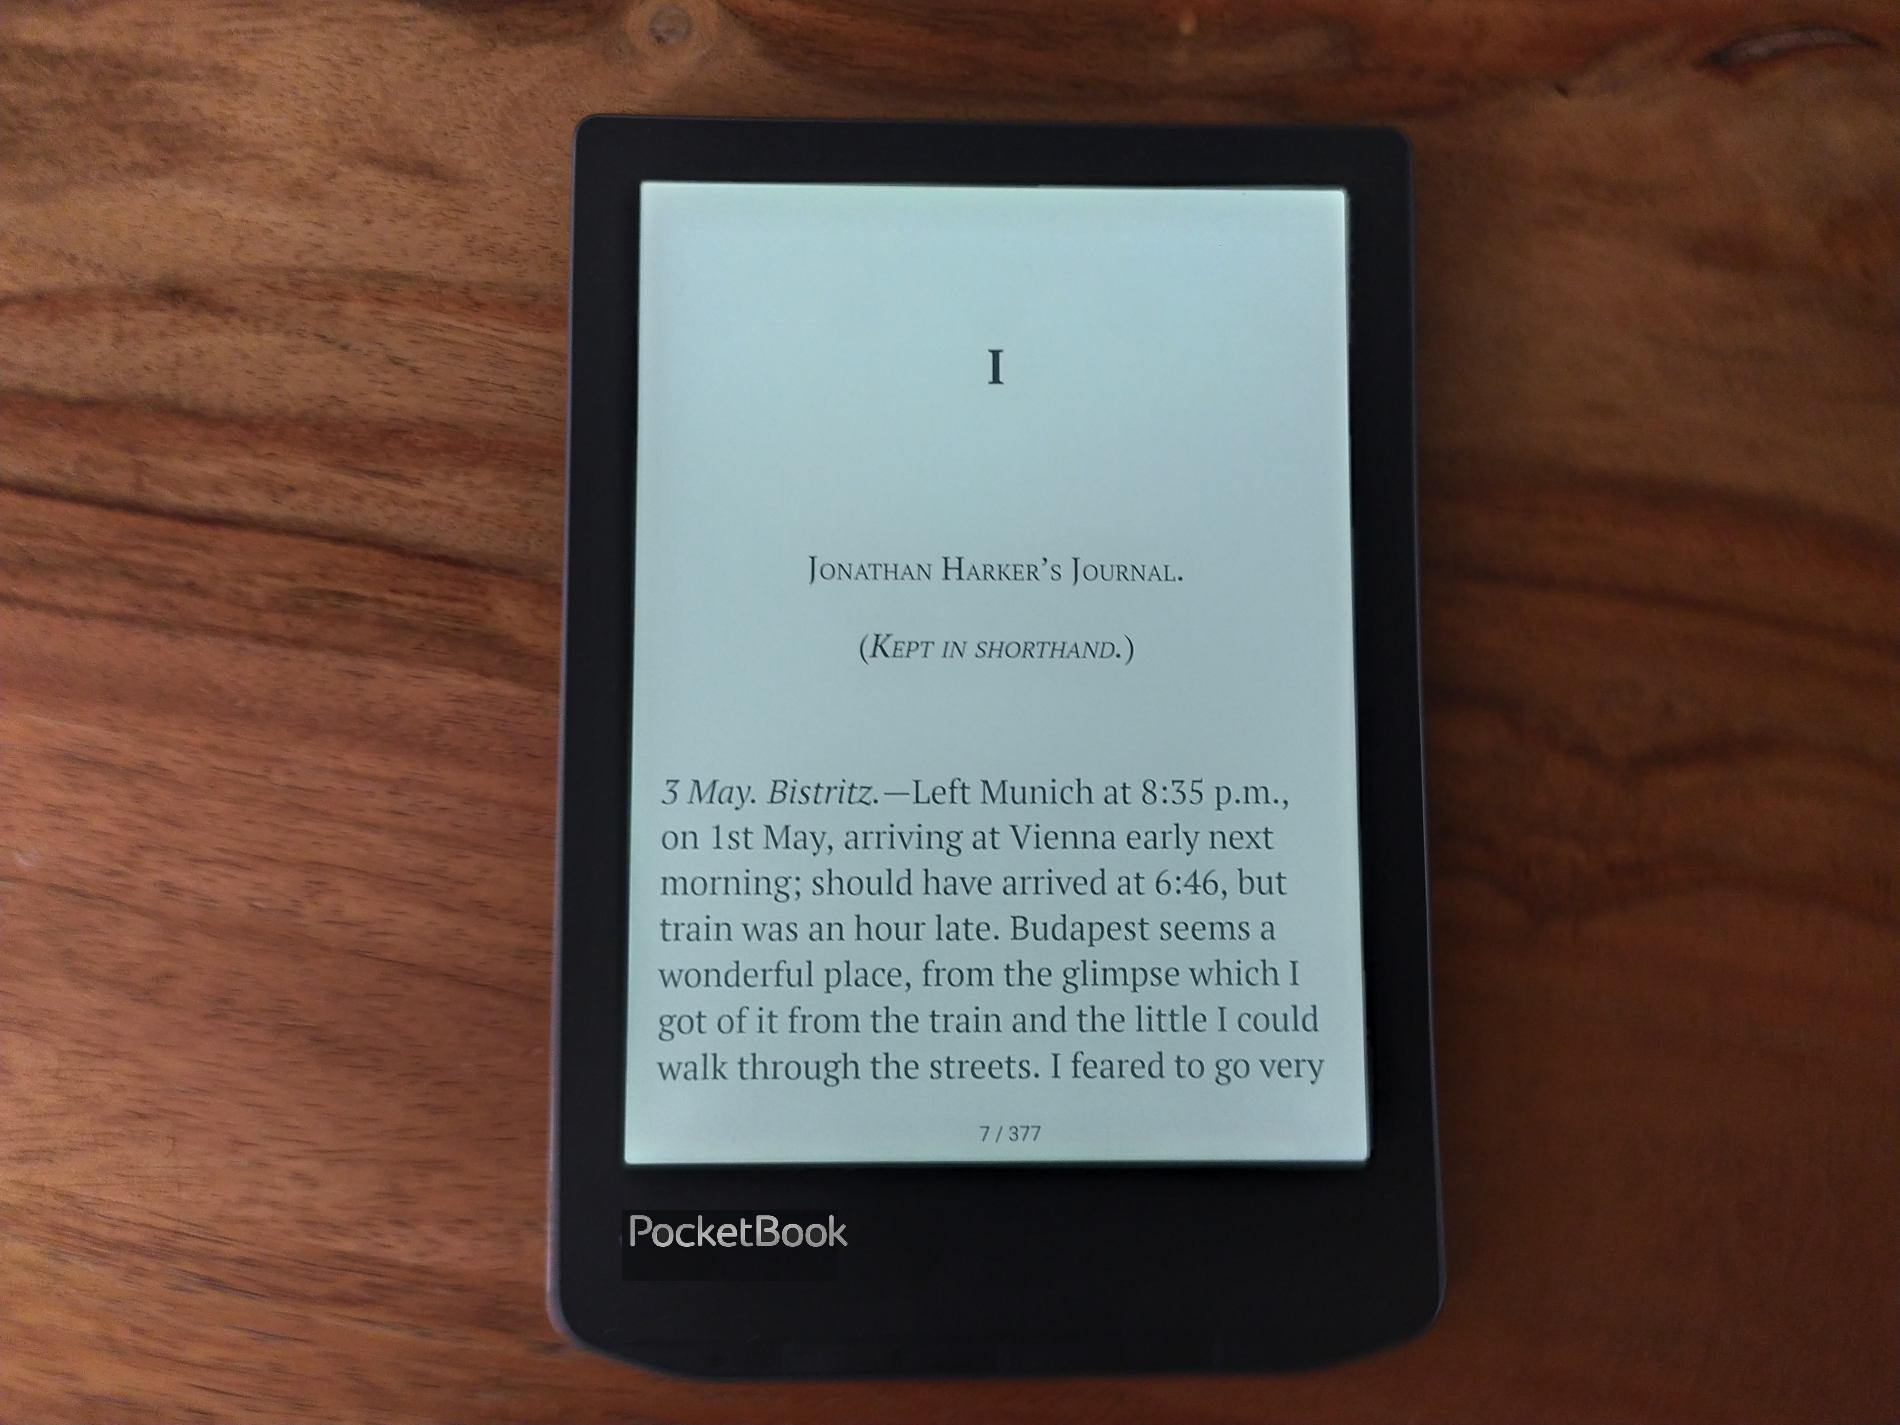 Pocketbook Verse Pro Review: a full-featured 6-inch e-reader